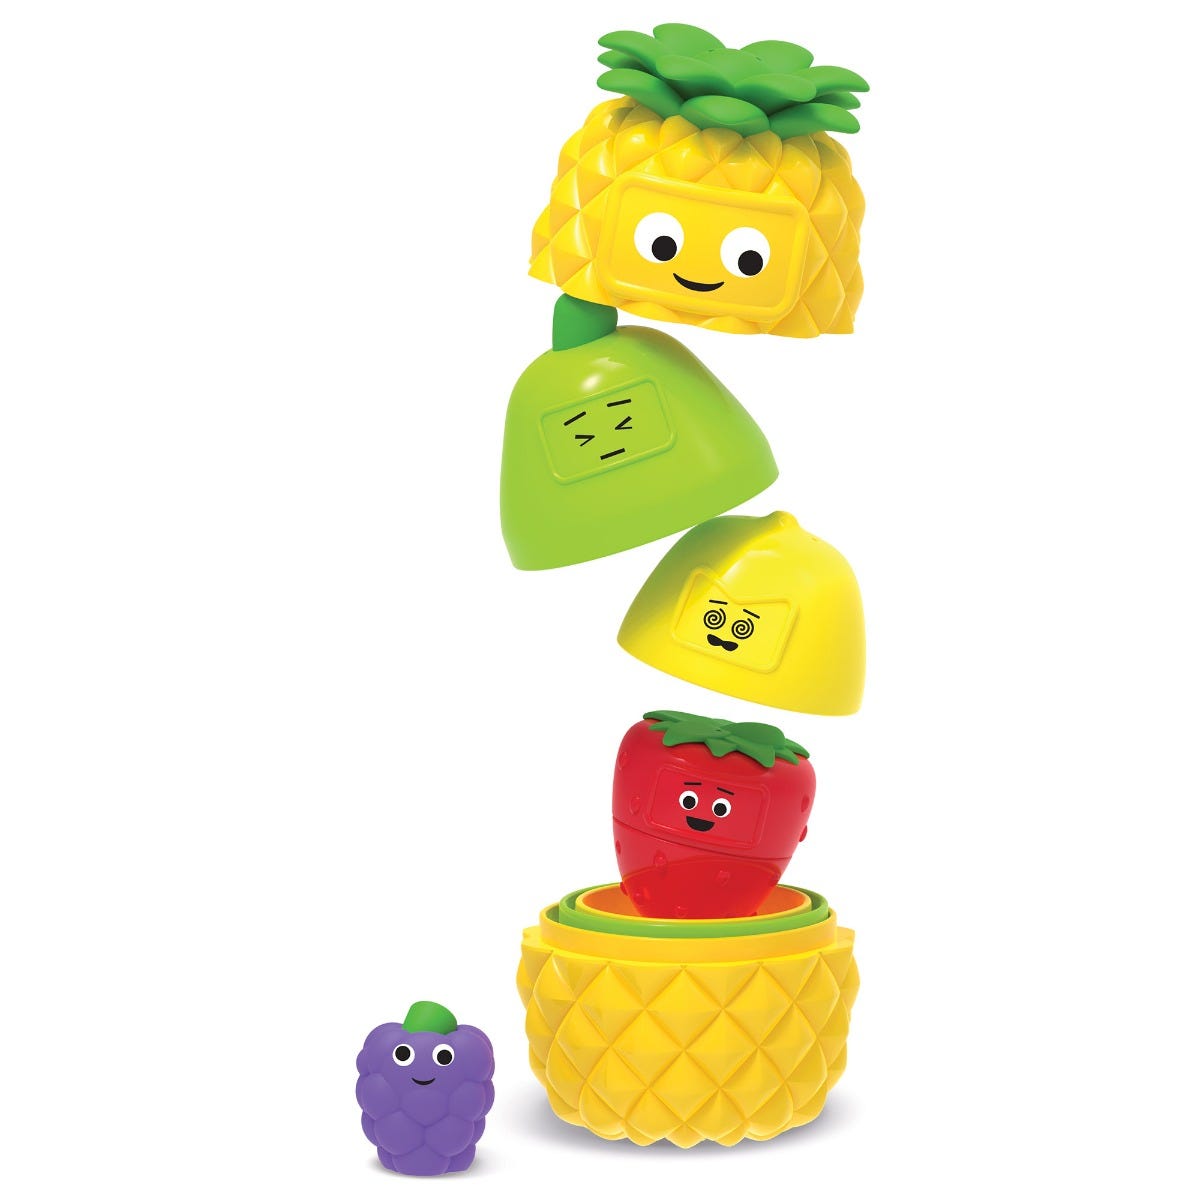 Big Feelings Nesting Fruit Friends, Lift the top off the Big Feelings Nesting Fruit Friends toddler toy and find the surprise fruit friend nested inside. Keep going until you discover them all! Each of these 5 colourful nesting fruits (pineapple, pear, lemon, strawberry and grapes) has 2 different contrasting expressions that help children build social emotional learning skills as they learn about feelings and facial expressions through fun play and discovery. Little ones build essential social-emotional le